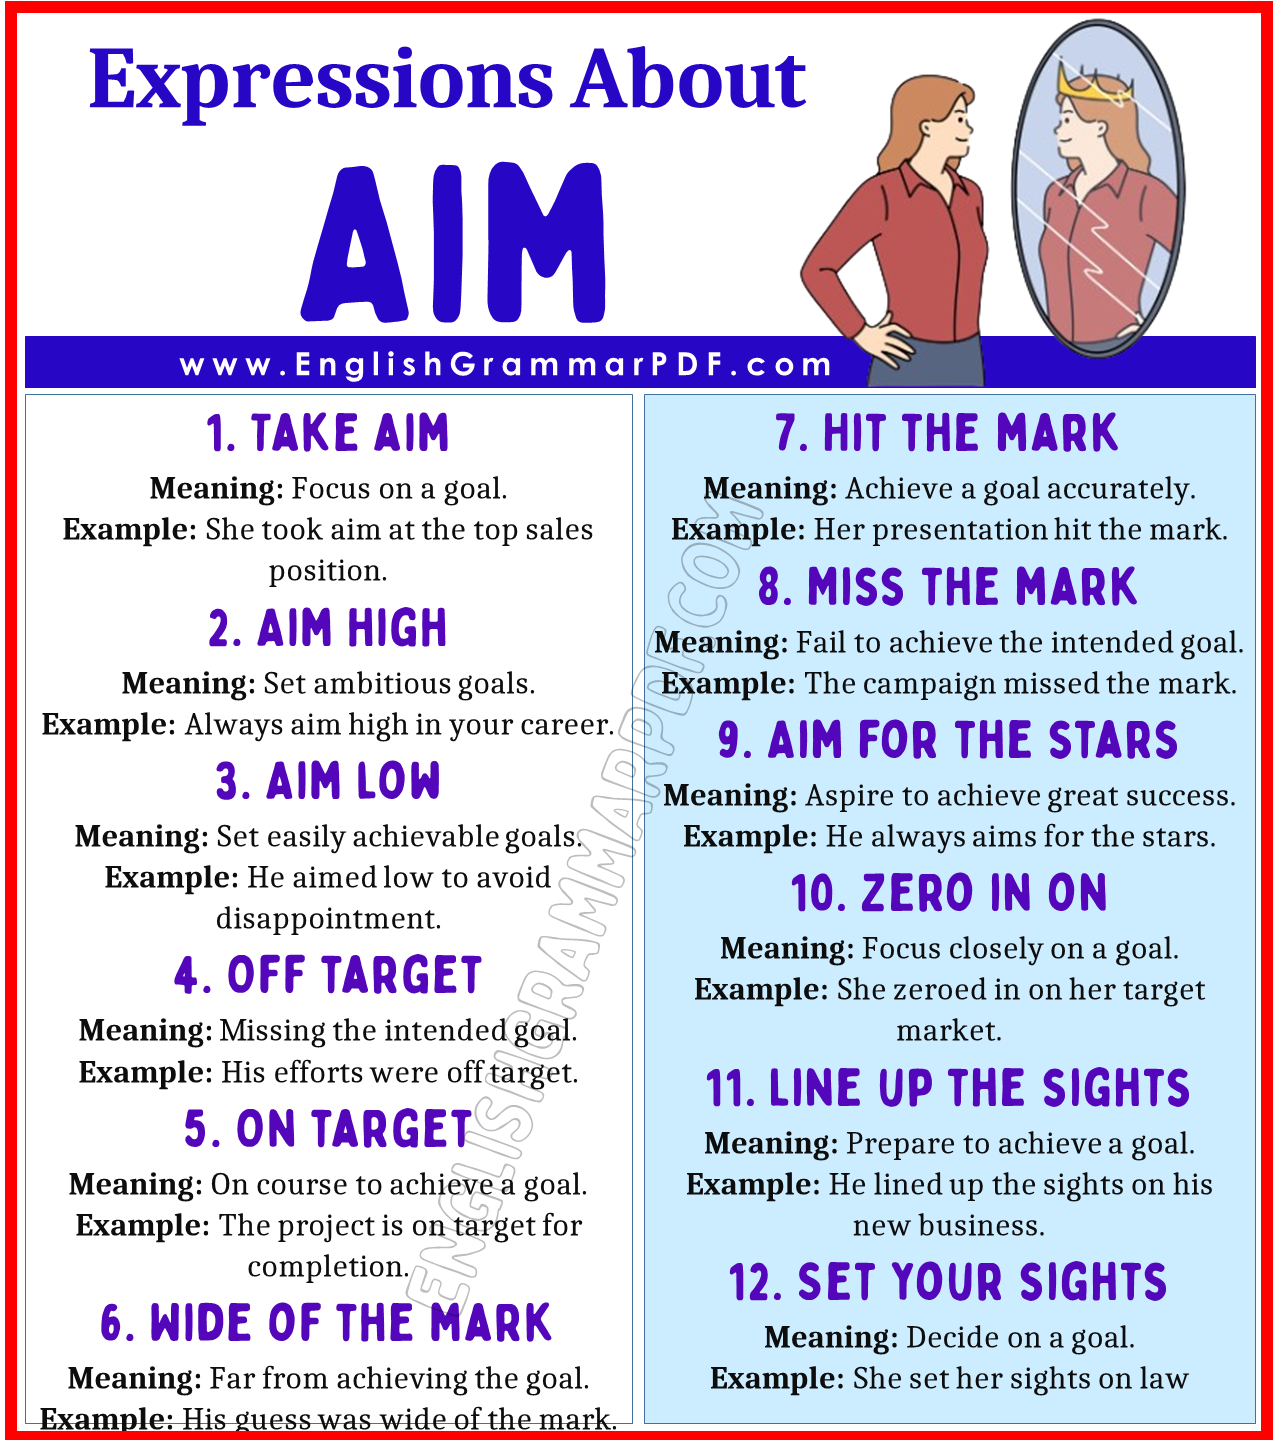 Expressions About Aim